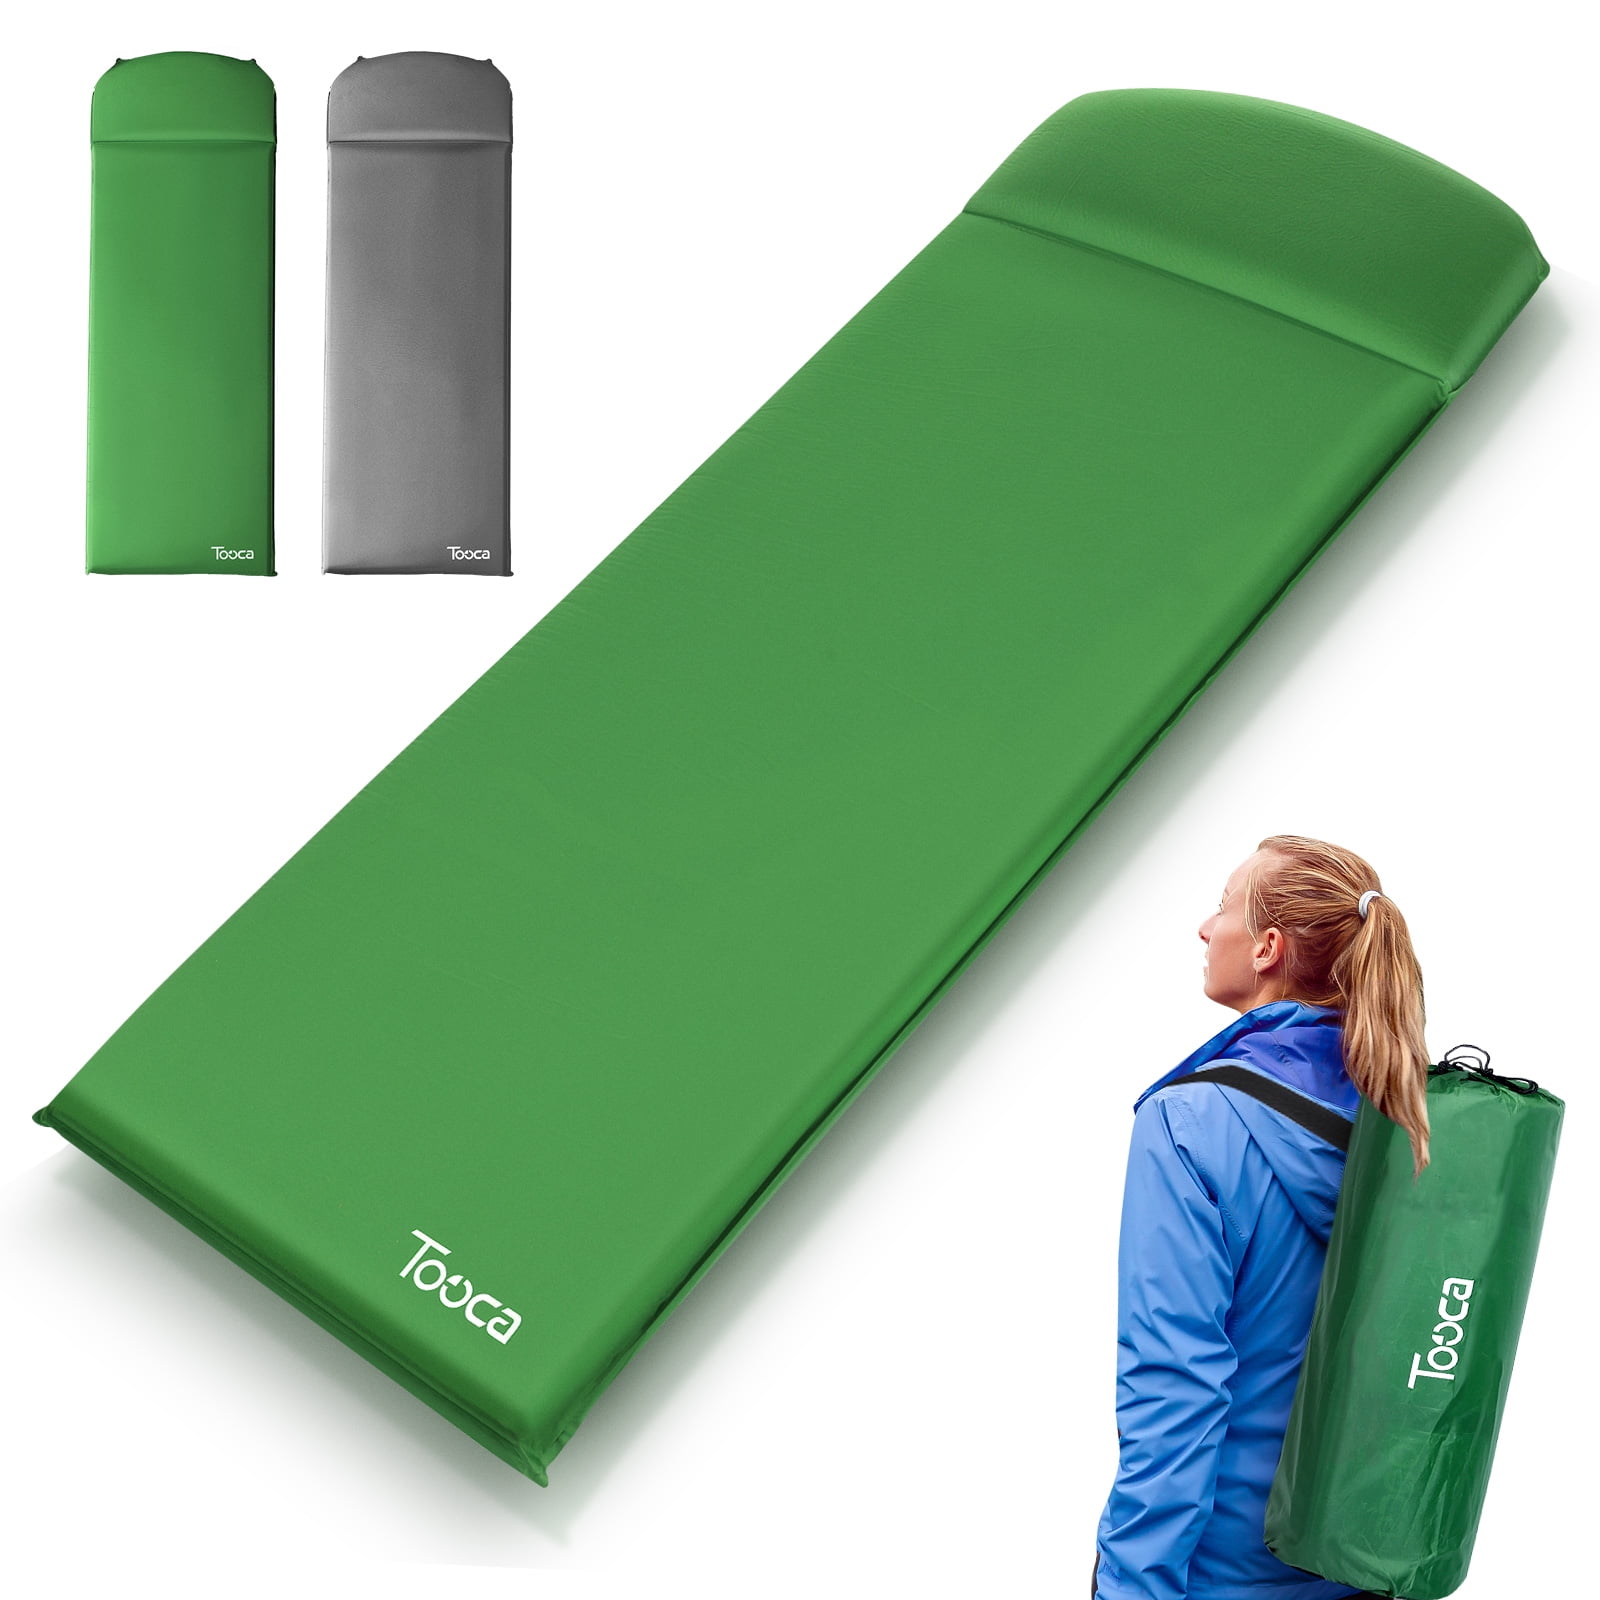 Sleeping Inflating Camping Sleep Pad with Pillow 3 Inches Thickness Sponge Camping for Traveling, Hiking Lightweight, Inflatable & Compact Walmart.com